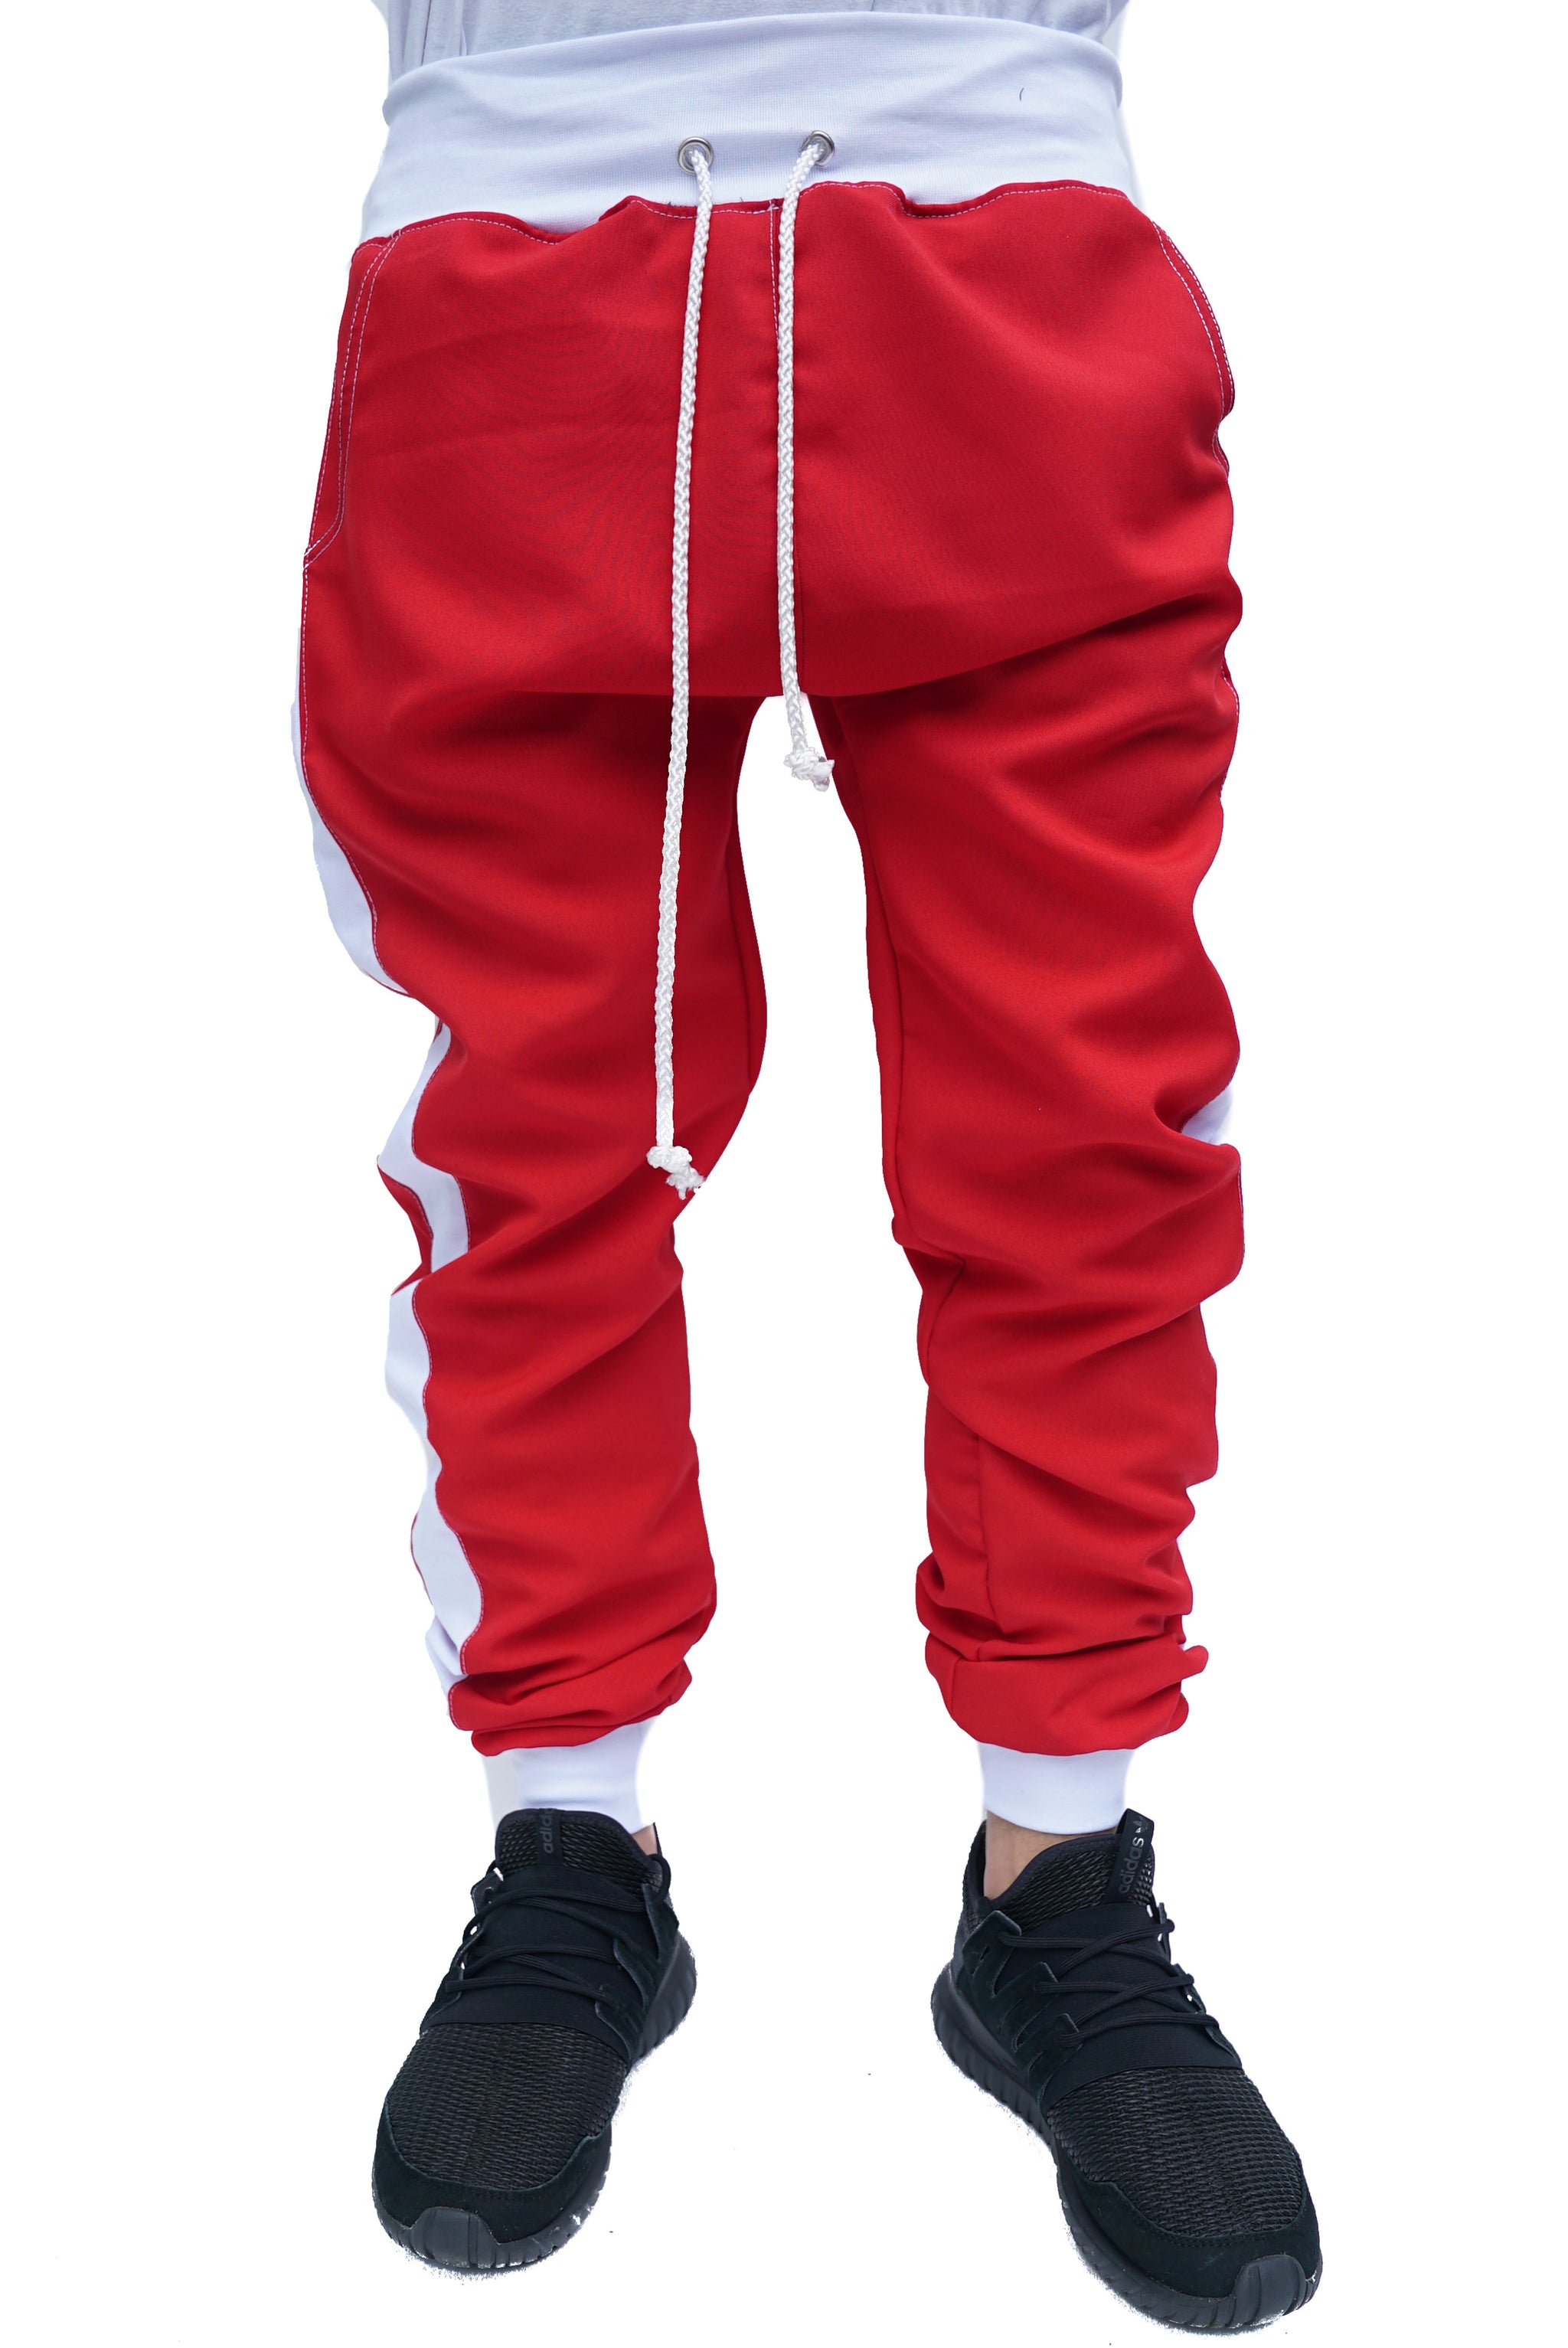 white track pants with red stripe